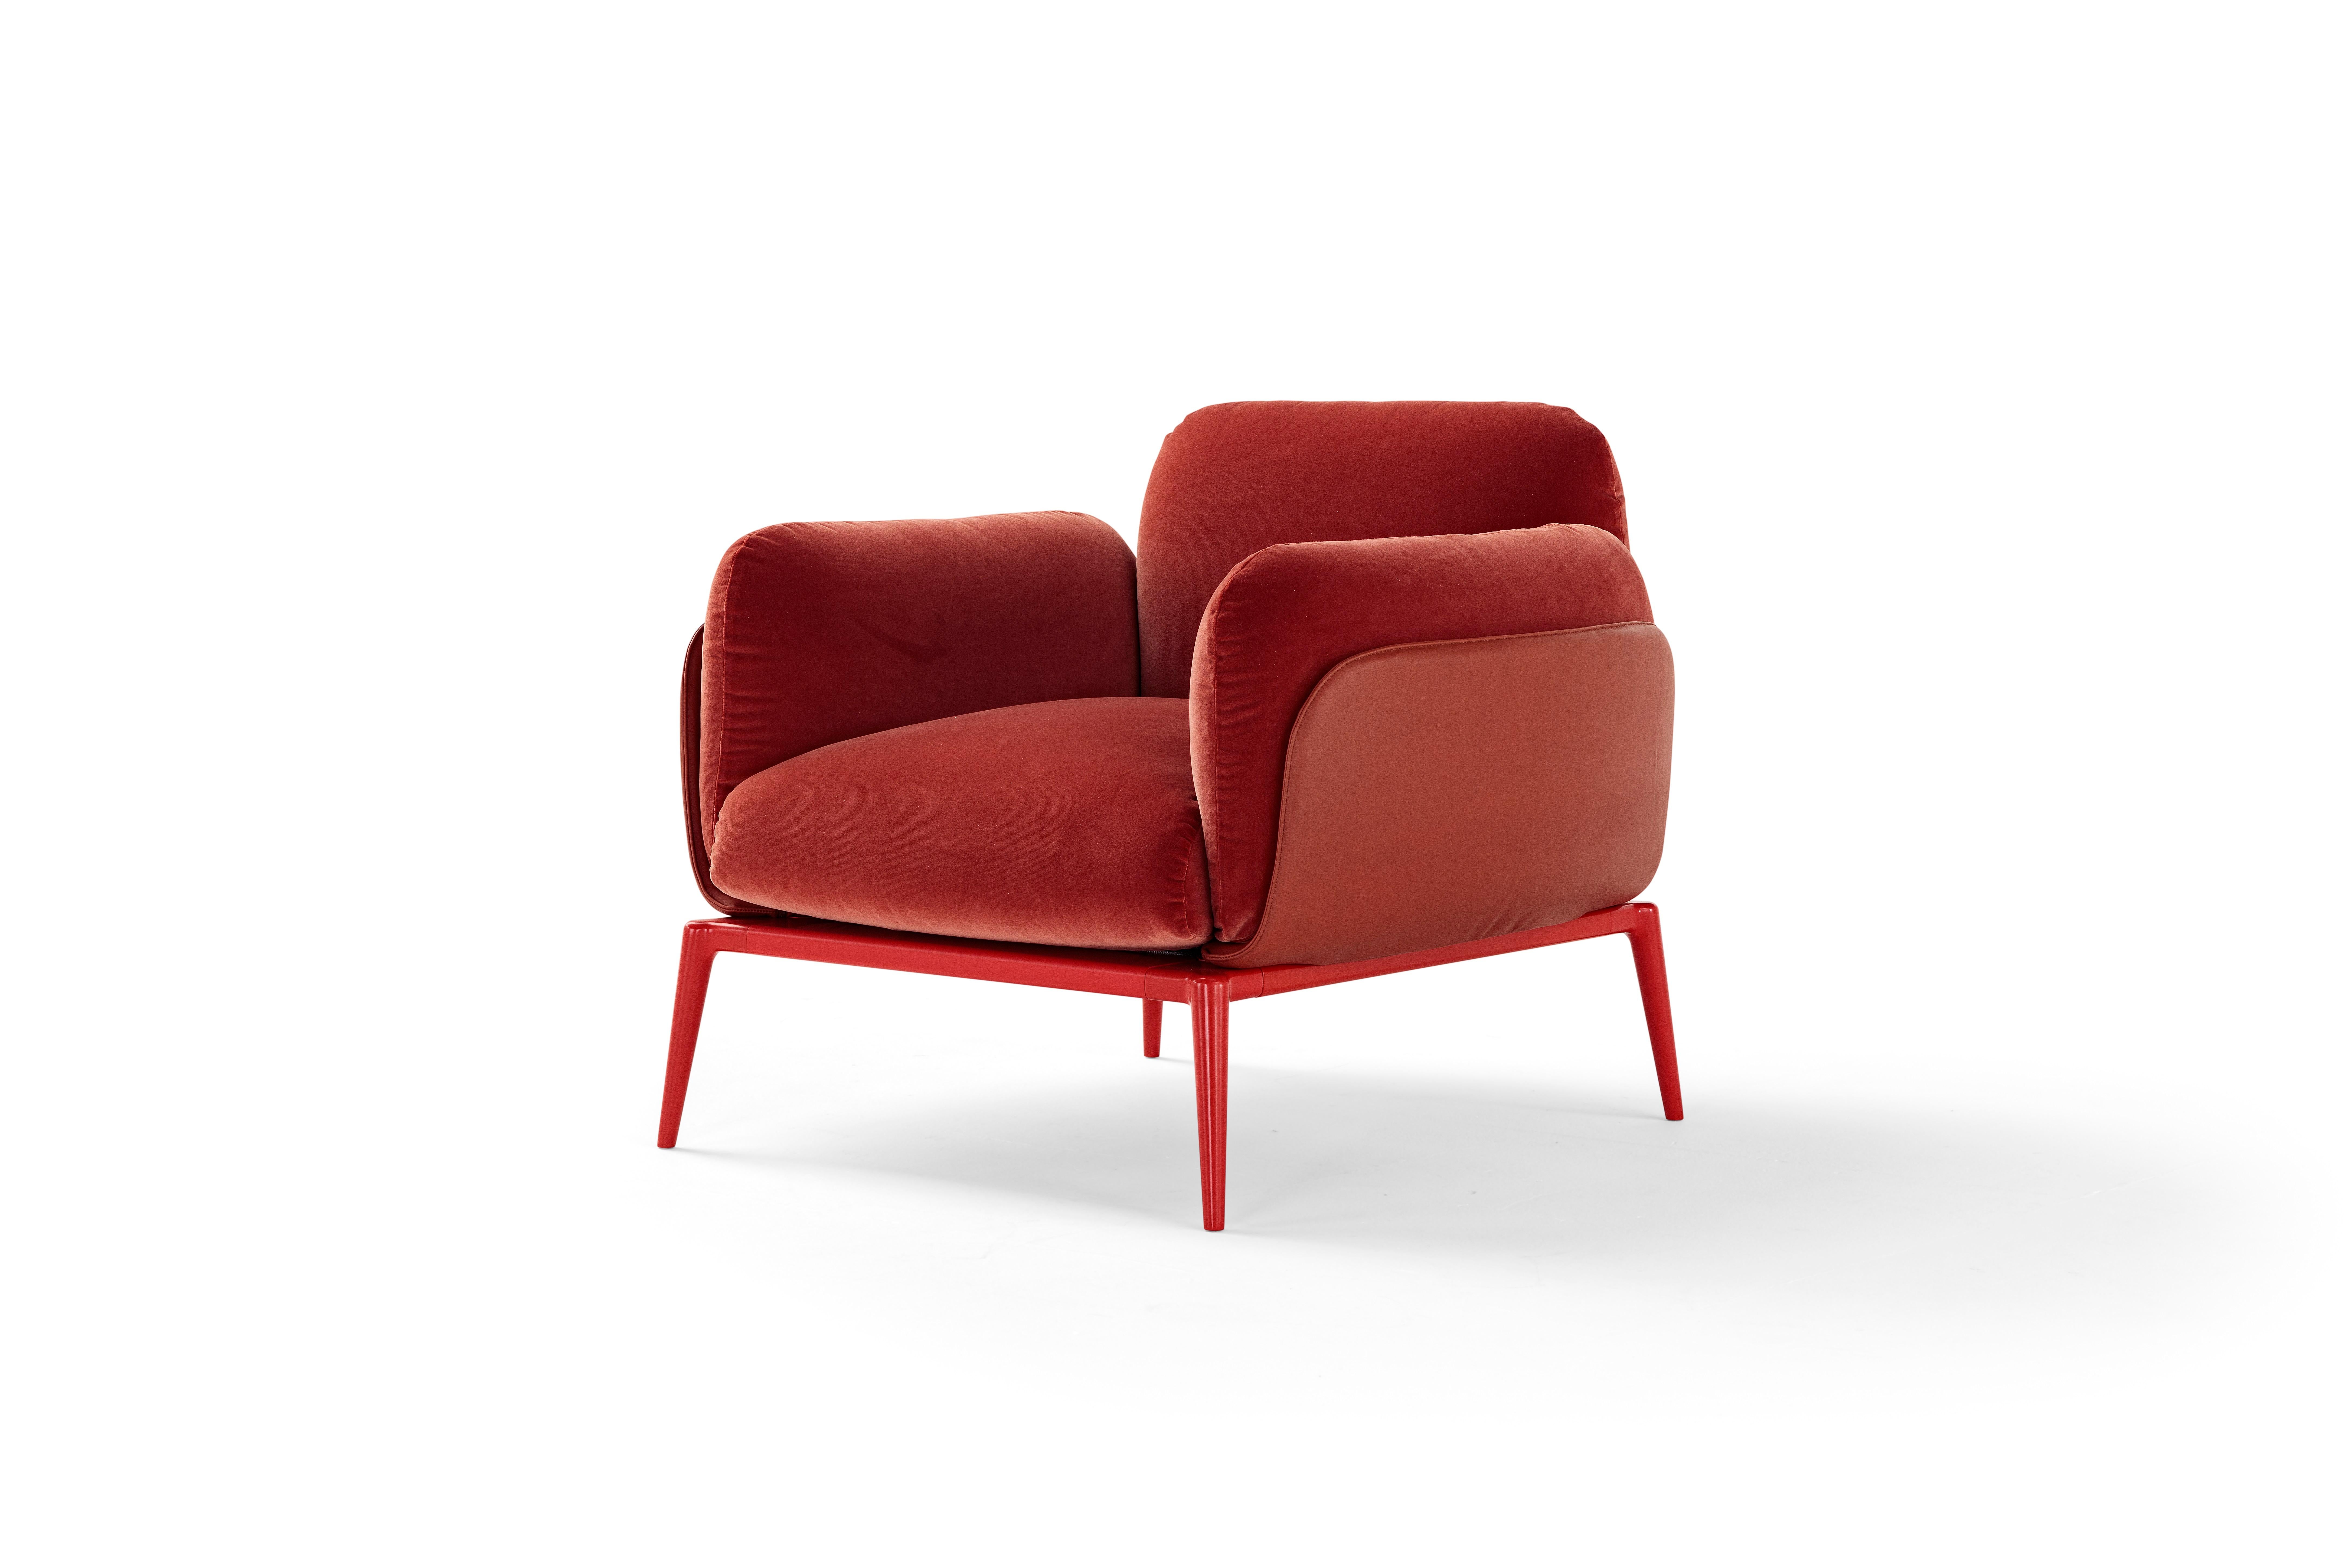 It is a hotpot of trends, springing from diverse styles, the New York neighbourhood that lends its name to the new system of modular sofas and ottomans, Brooklyn. A choice that’s almost a declaration of intents: the strong personality of the